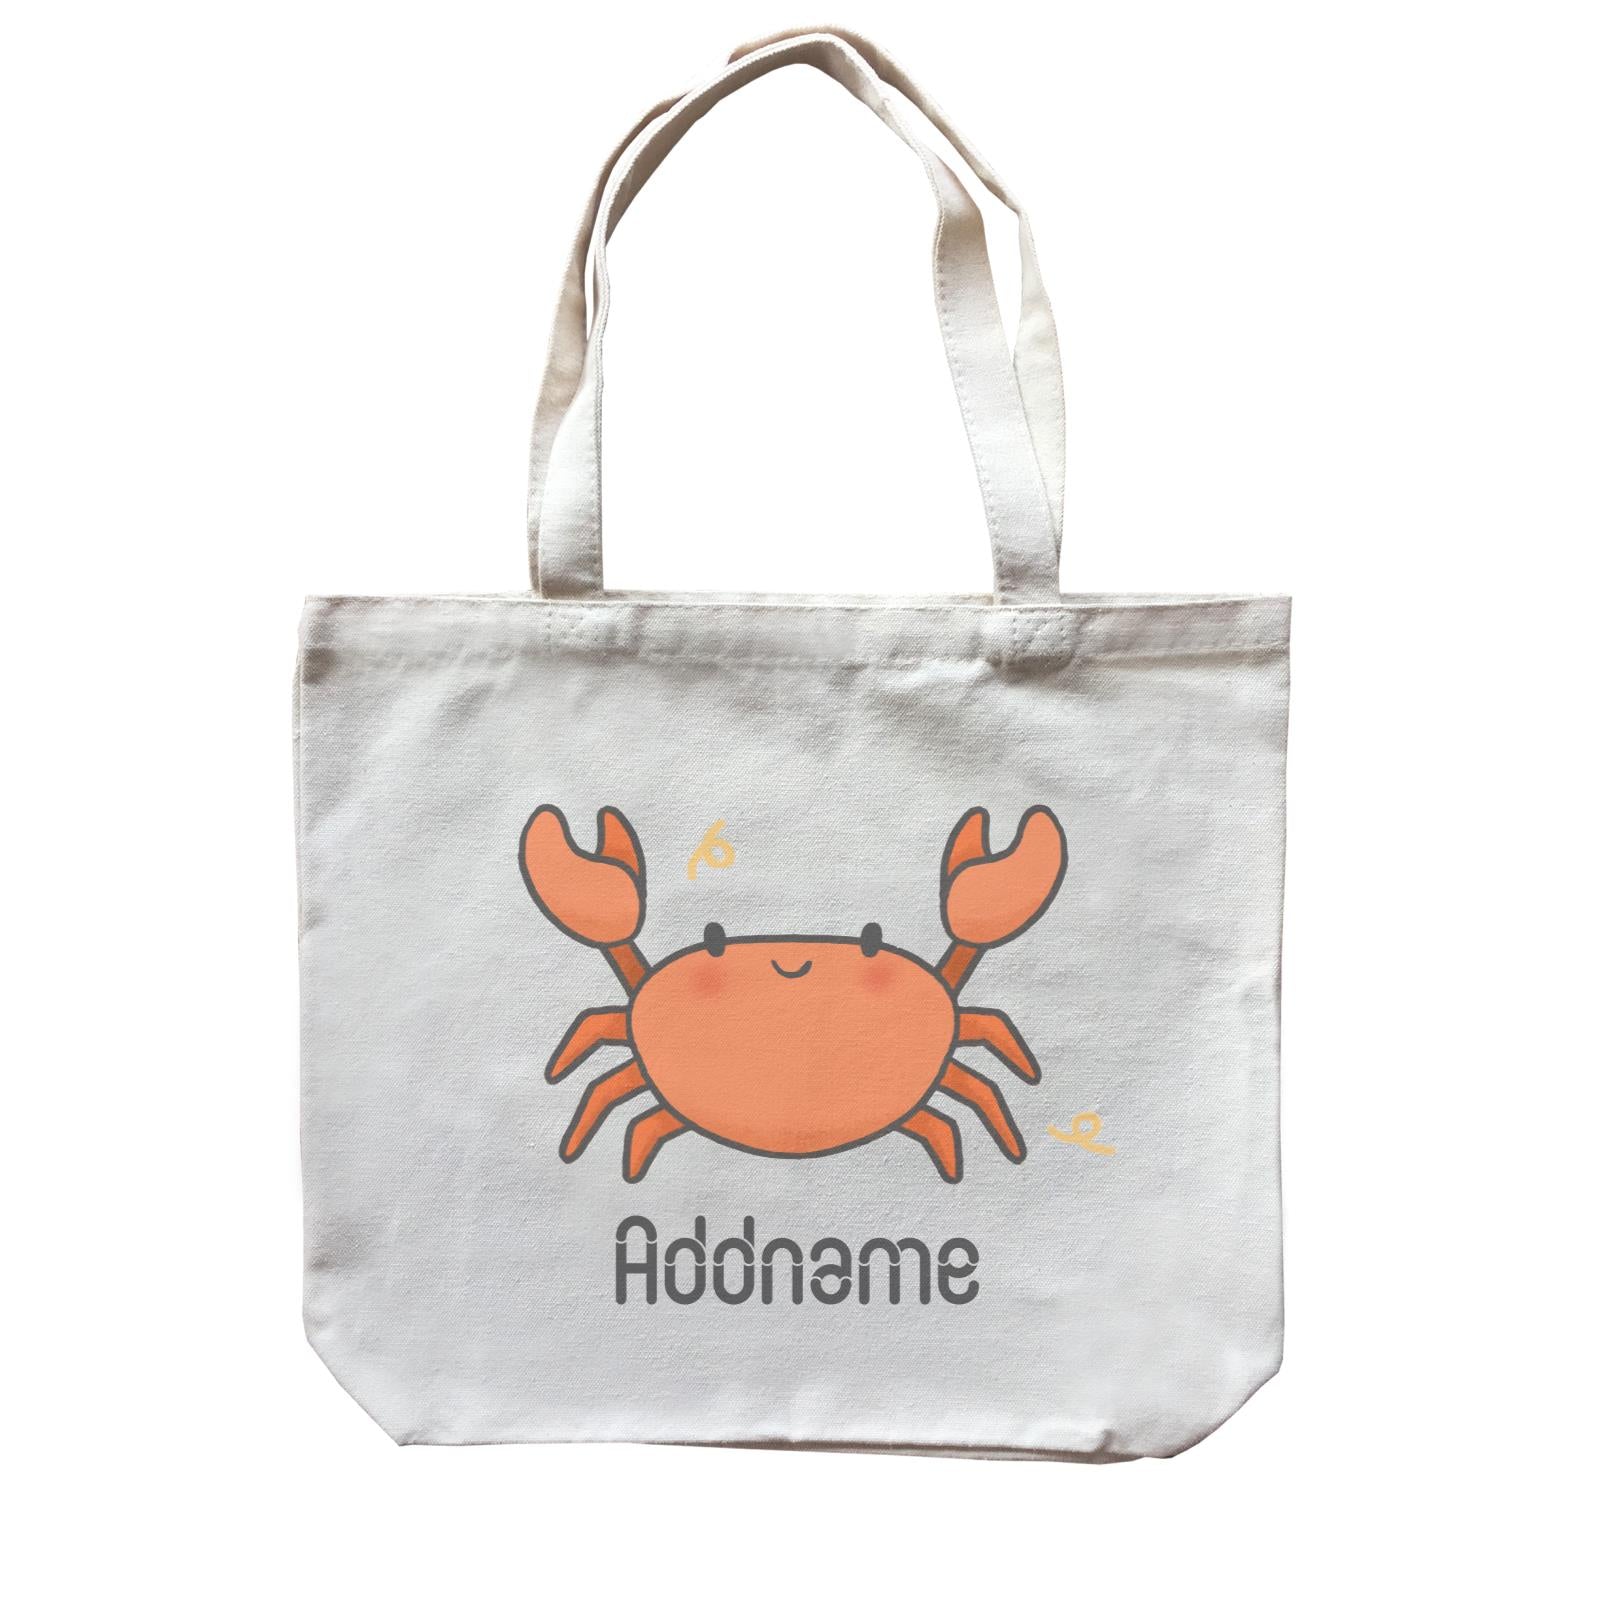 Cute Hand Drawn Style Crab Addname Canvas Bag